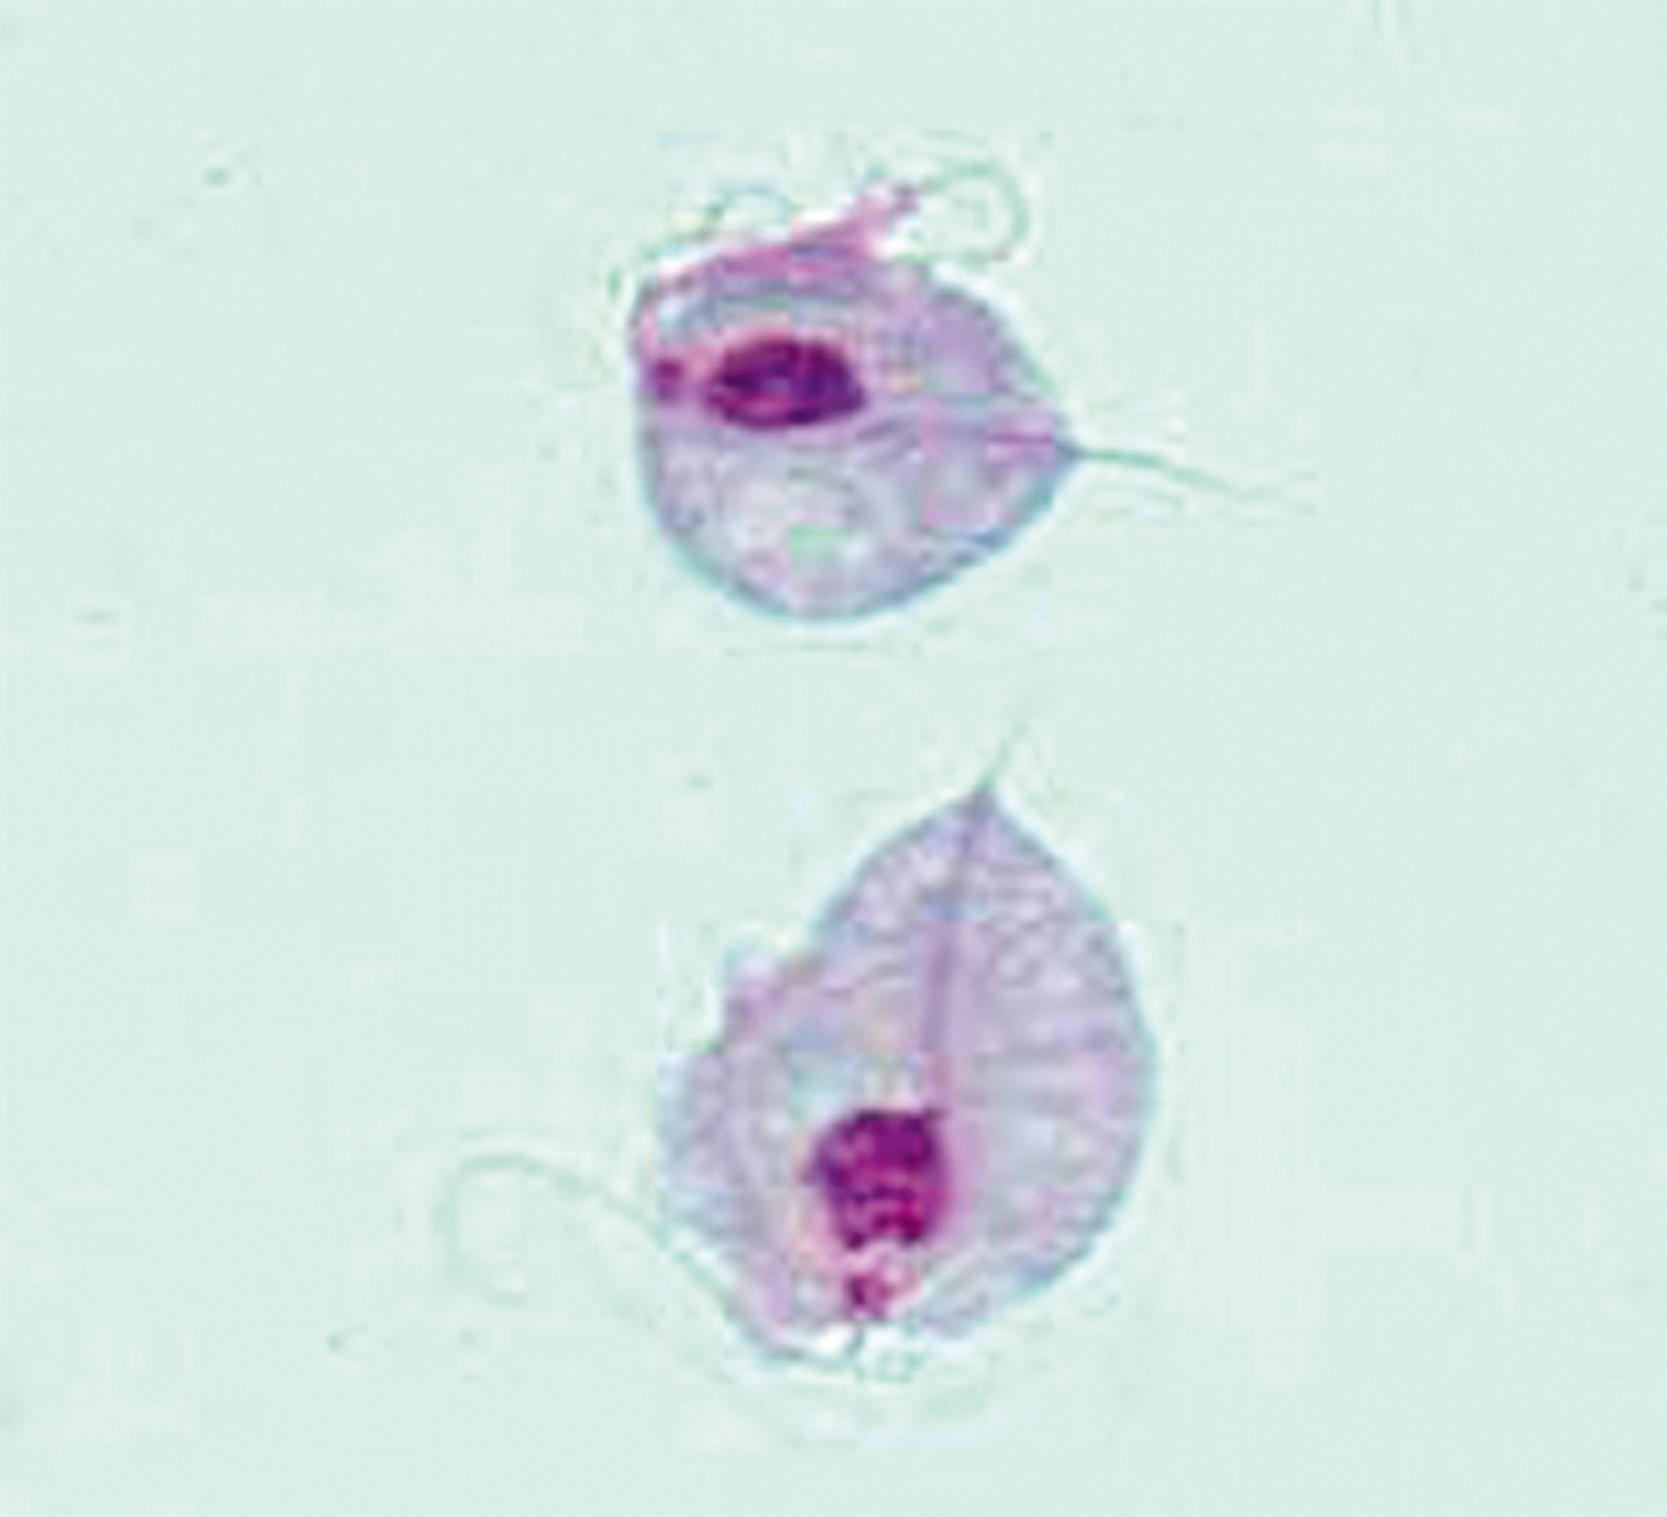 FIGURE 274.1, Two trophozoites of Trichomonas vaginalis obtained from in vitro culture (Giemsa stain).